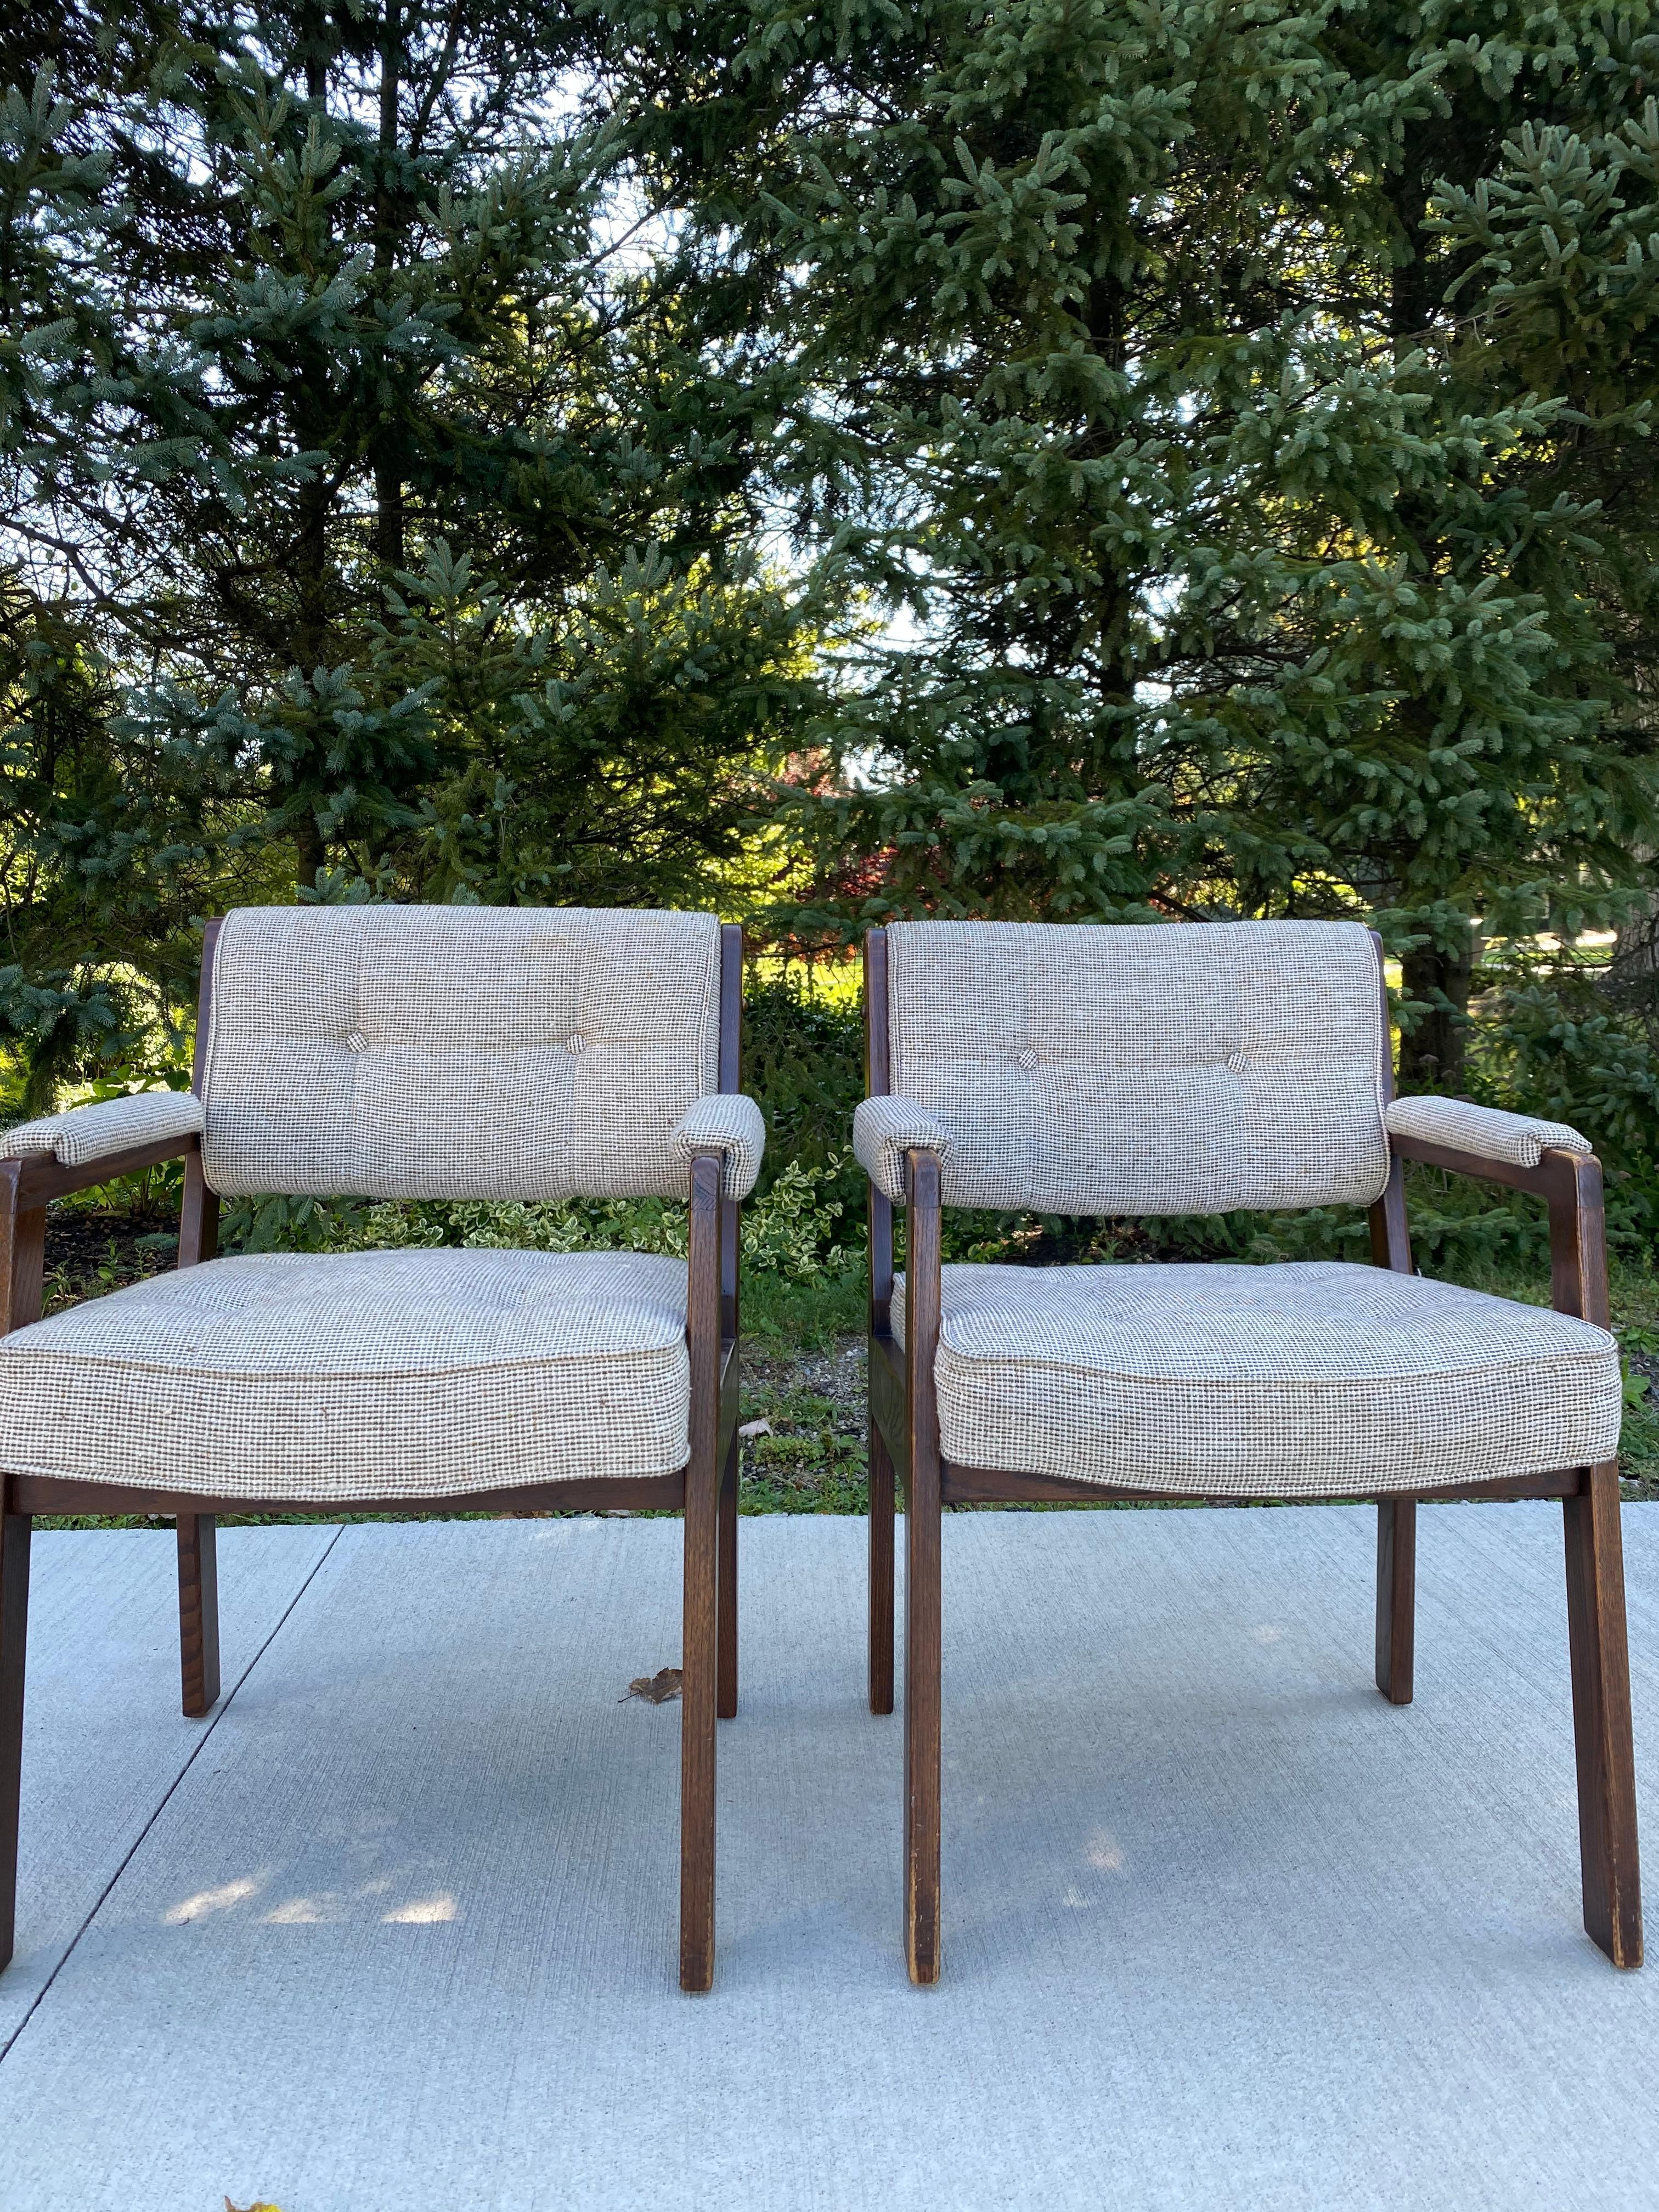 Set of 2 white/gray Mid-Century Modern style accent chairs in an eye-catching tweed fabric by La-Z-Boy. The chairs are very sturdy and comfortable. They have been cleaned but the chairs hold some imperfections on the wood frames, see picture.